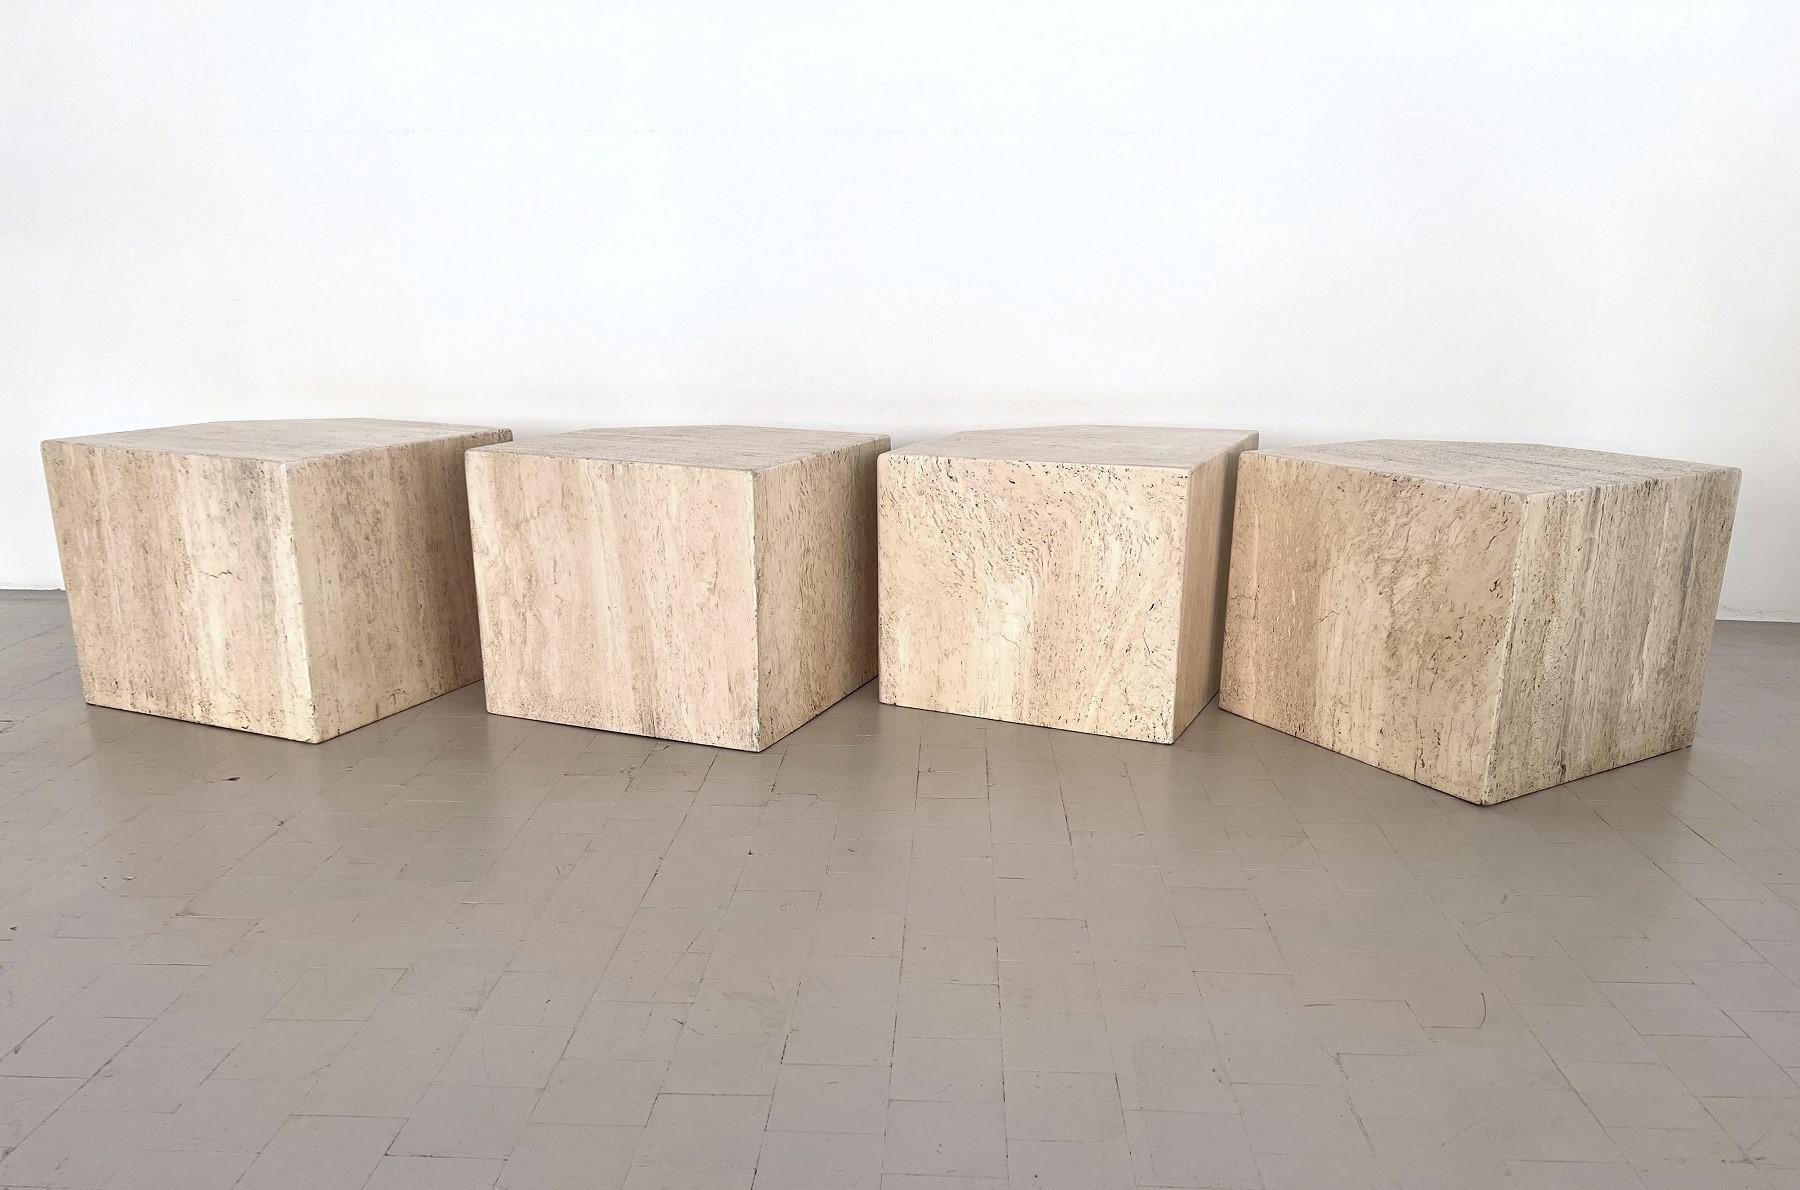 Italian Midcentury Sectional Travertine Marble Coffee Table of Four Pieces, 1970 For Sale 2